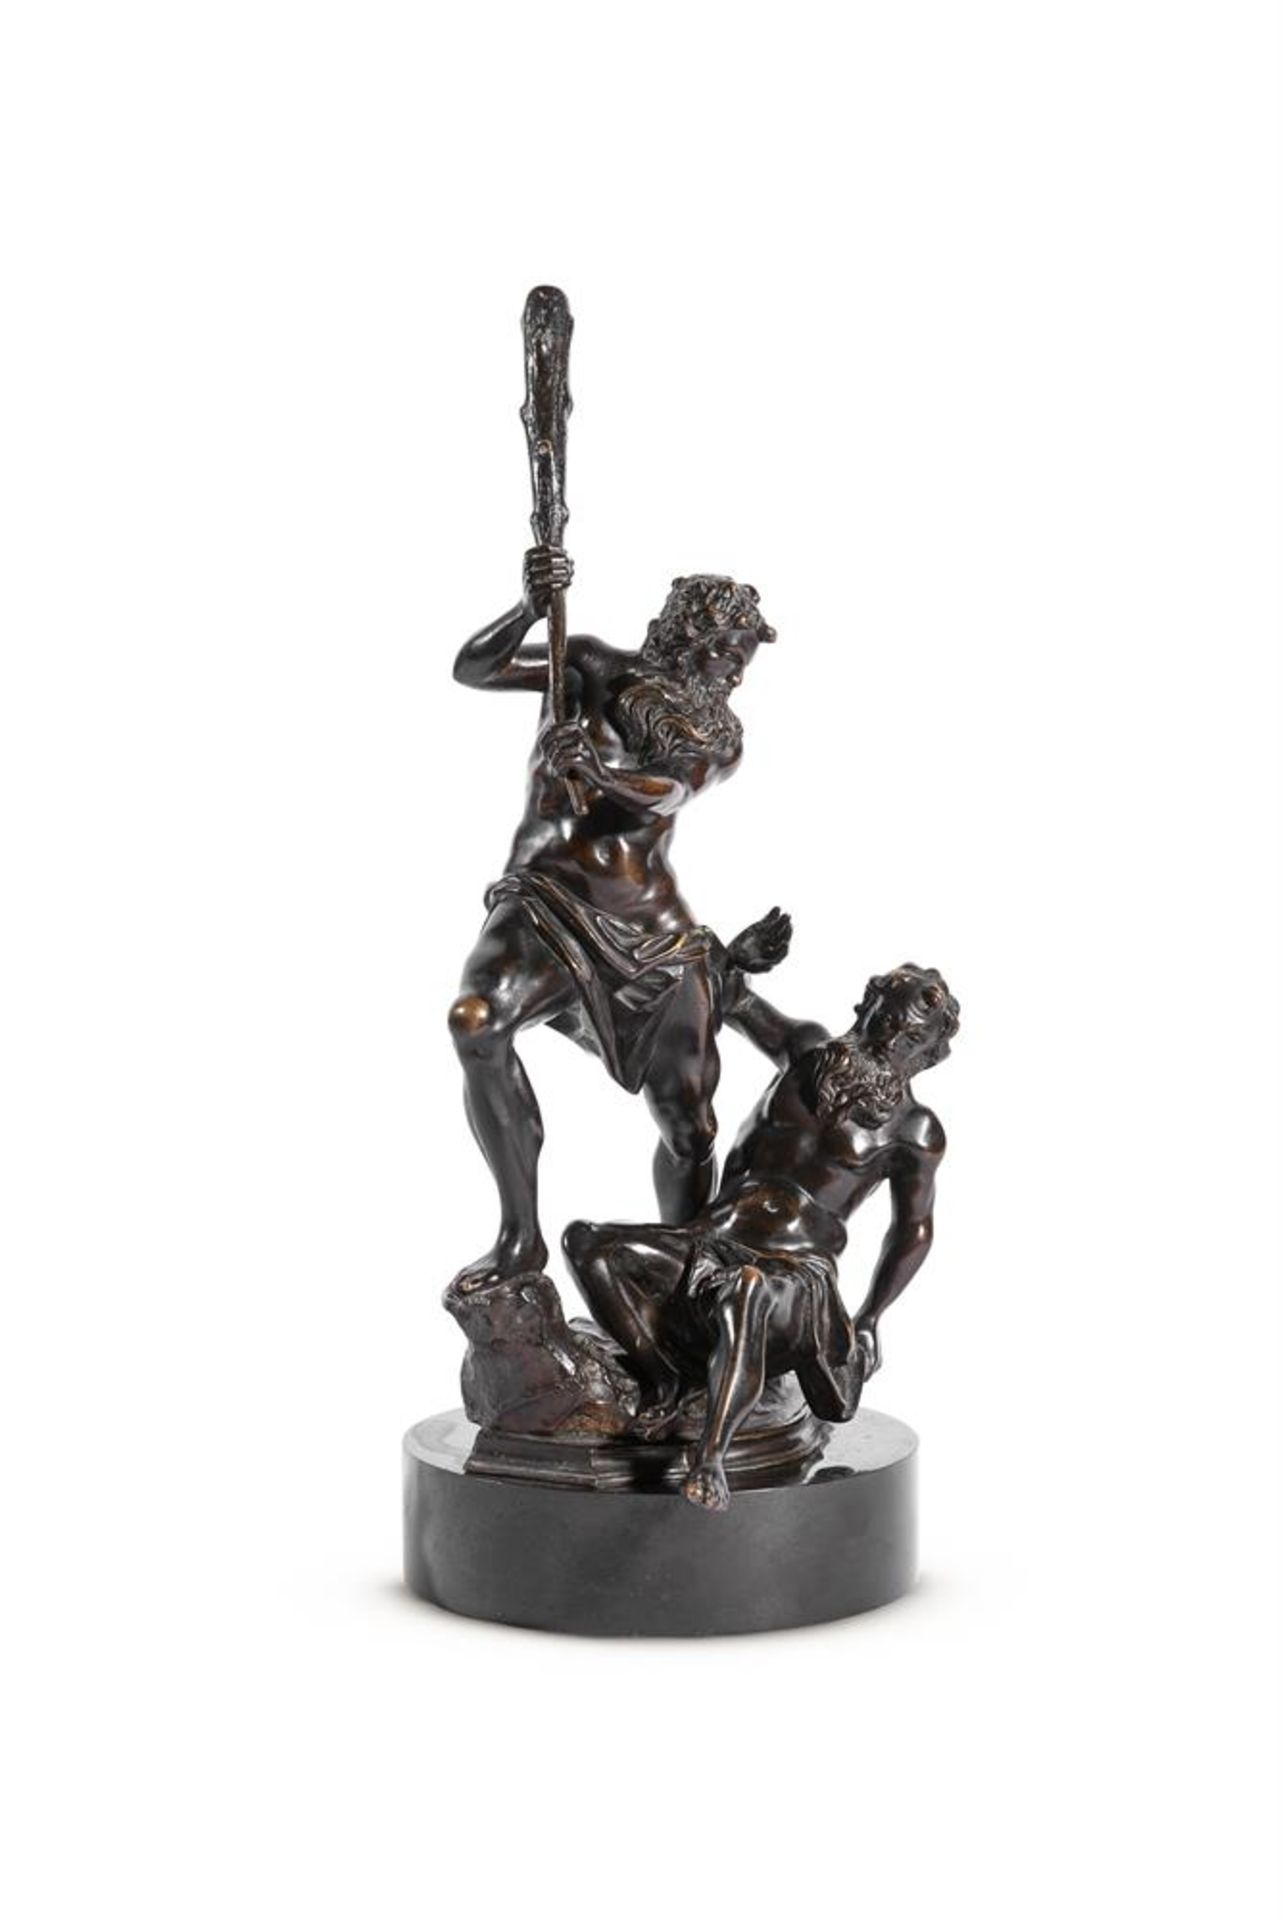 AN ITALIAN BRONZE GROUP OF HERCULES AND CACUS, 18TH/19TH CENTURY - Image 2 of 3